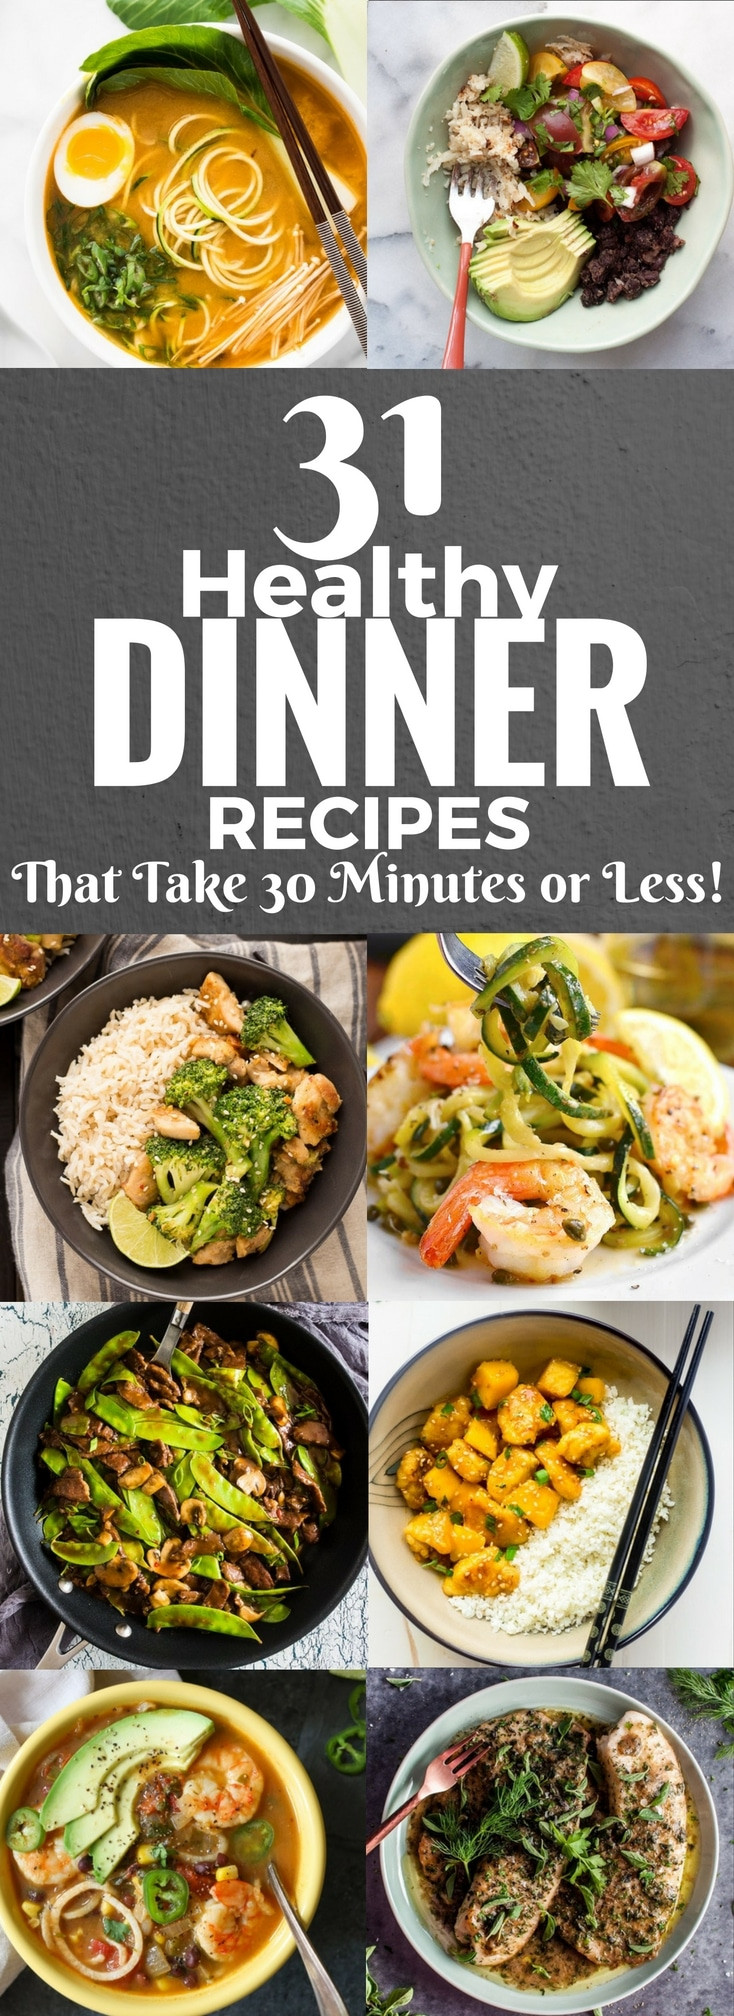 Healthy Foods To Eat For Dinner
 31 Healthy Dinner Recipes That Take 30 Minutes or Less